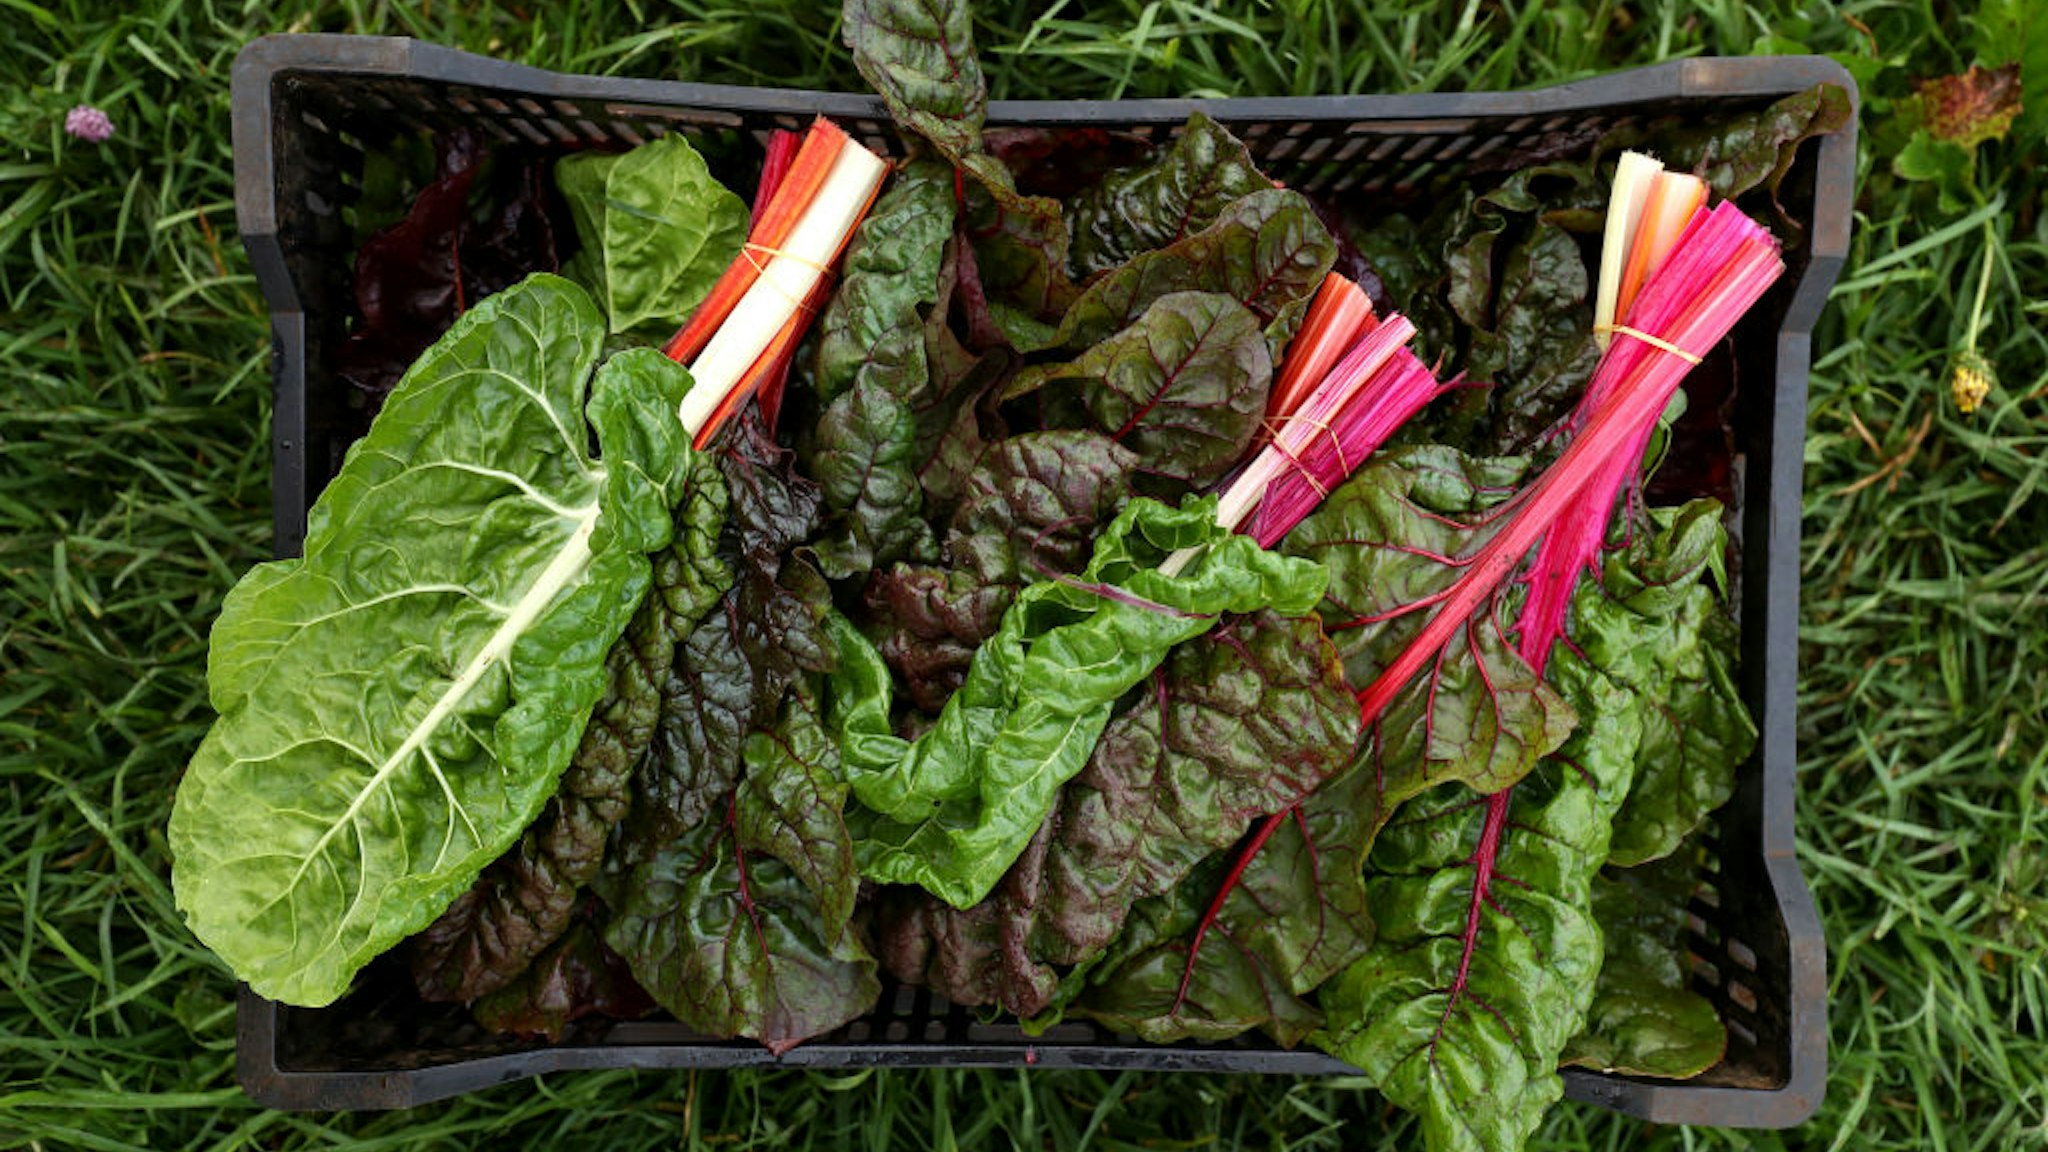 A basket of harvested rainbow Swiss chard at the organic farm of Moonacres, which also comprises of a cafe, pop-up restaurant and cooking school, in Fitzroy Falls, New South Wales, Australia, on Friday, Jan. 15, 2021. Australia's economy topped the latest Citigroup Inc. Economic Surprise Indices as authorities' relative success in containing Covid drove a surge in consumer confidence and a rebound in activity. Photographer: Brendon Thorne/Bloomberg via Getty Images